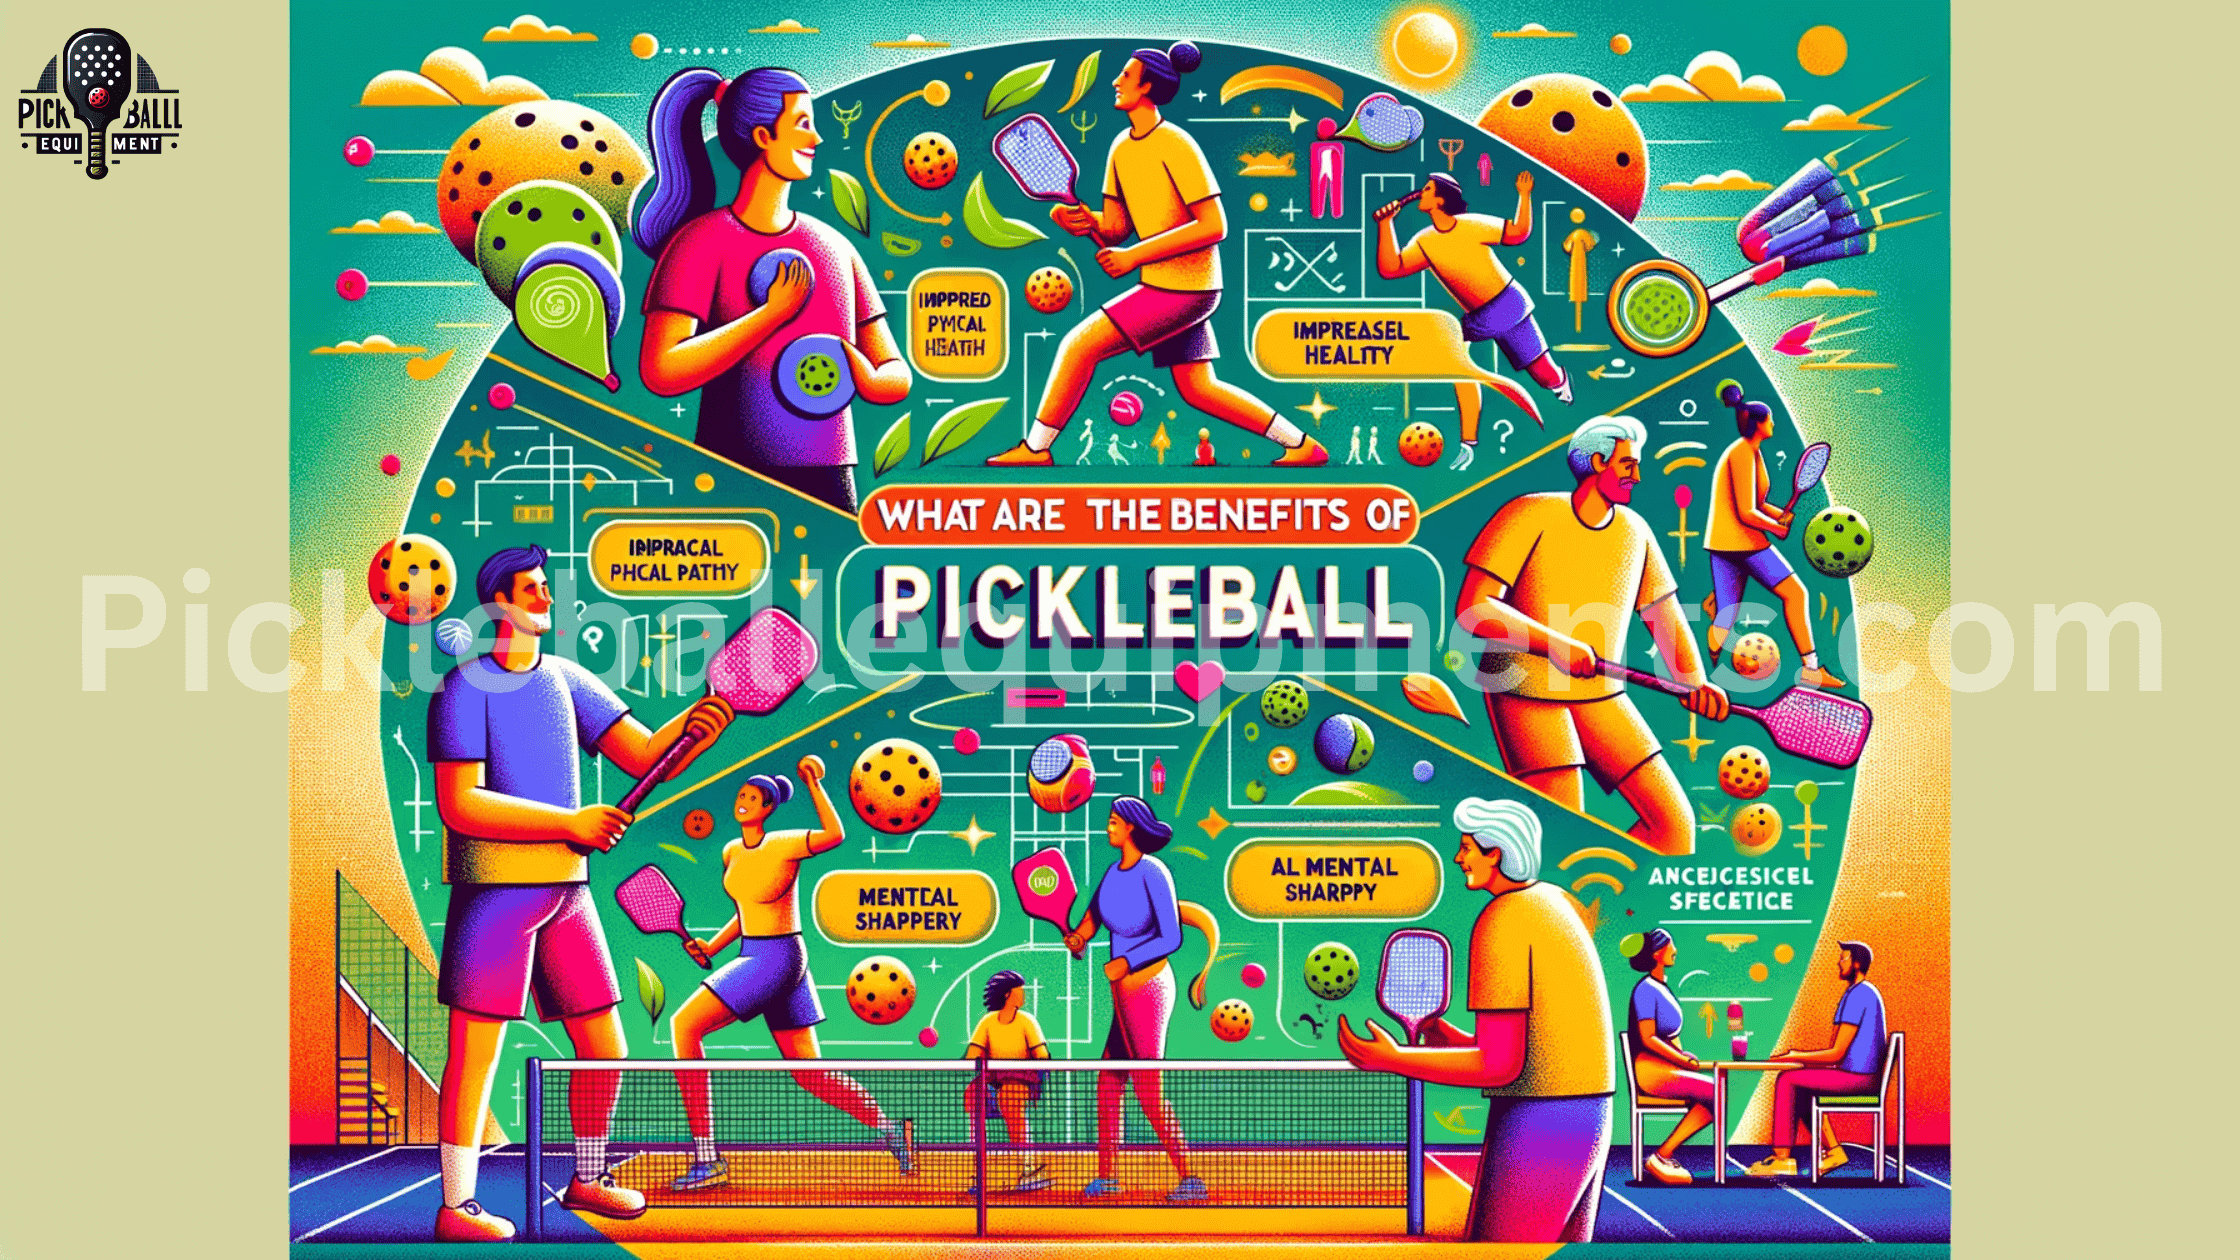 What are the benefits of playing pickleball